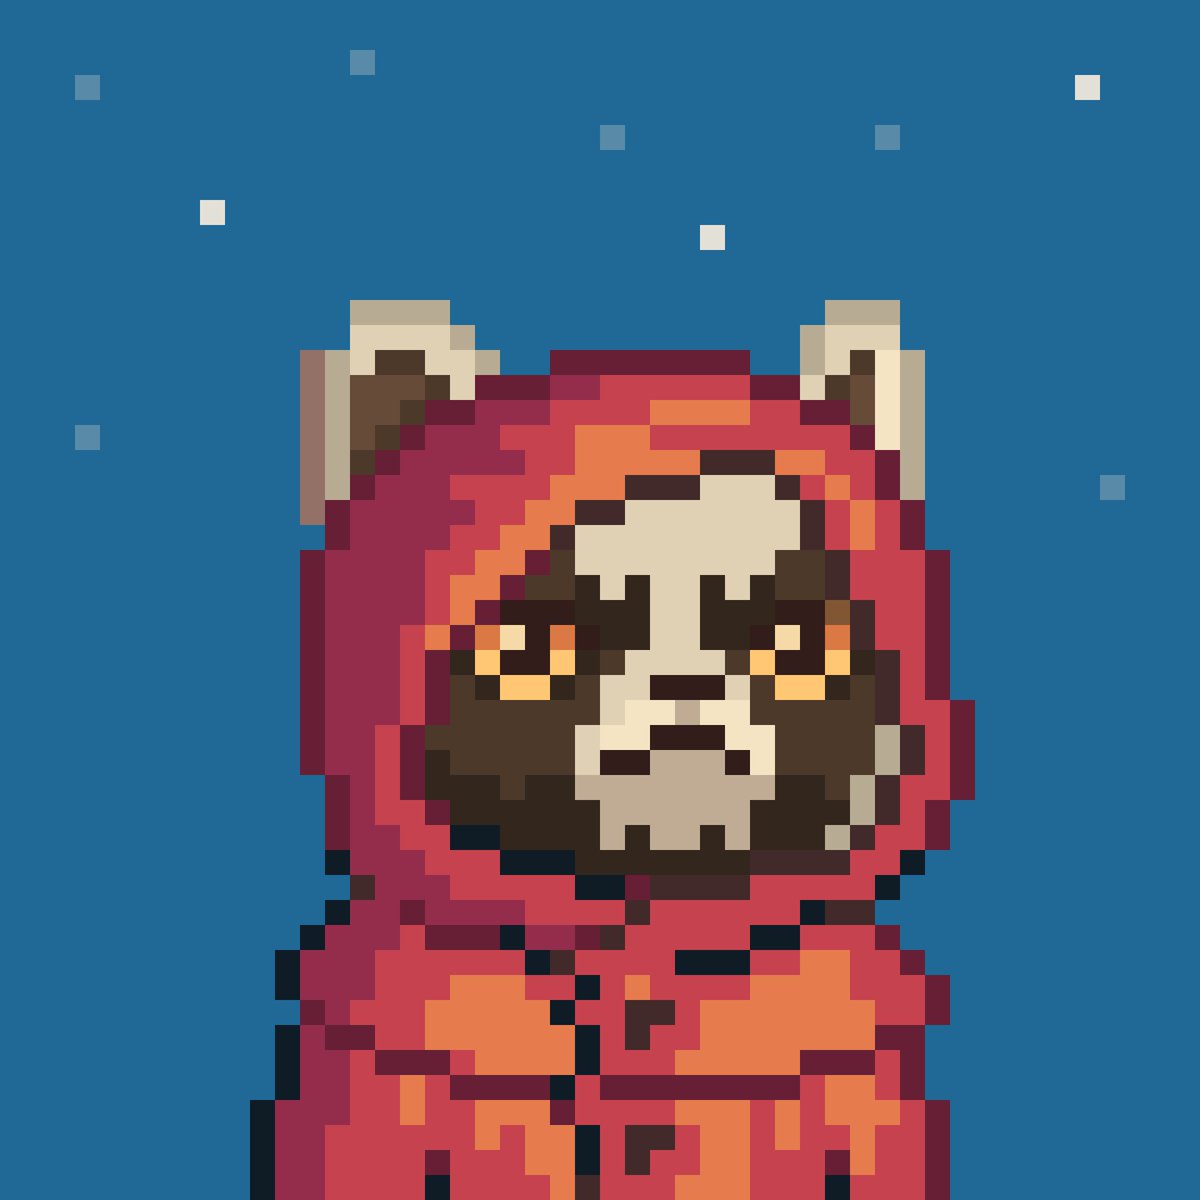 little red riding hood ❄️ just acquired. i love it so much and it’s going to be a my discord pfp for a while 🫡 @CrittersCult